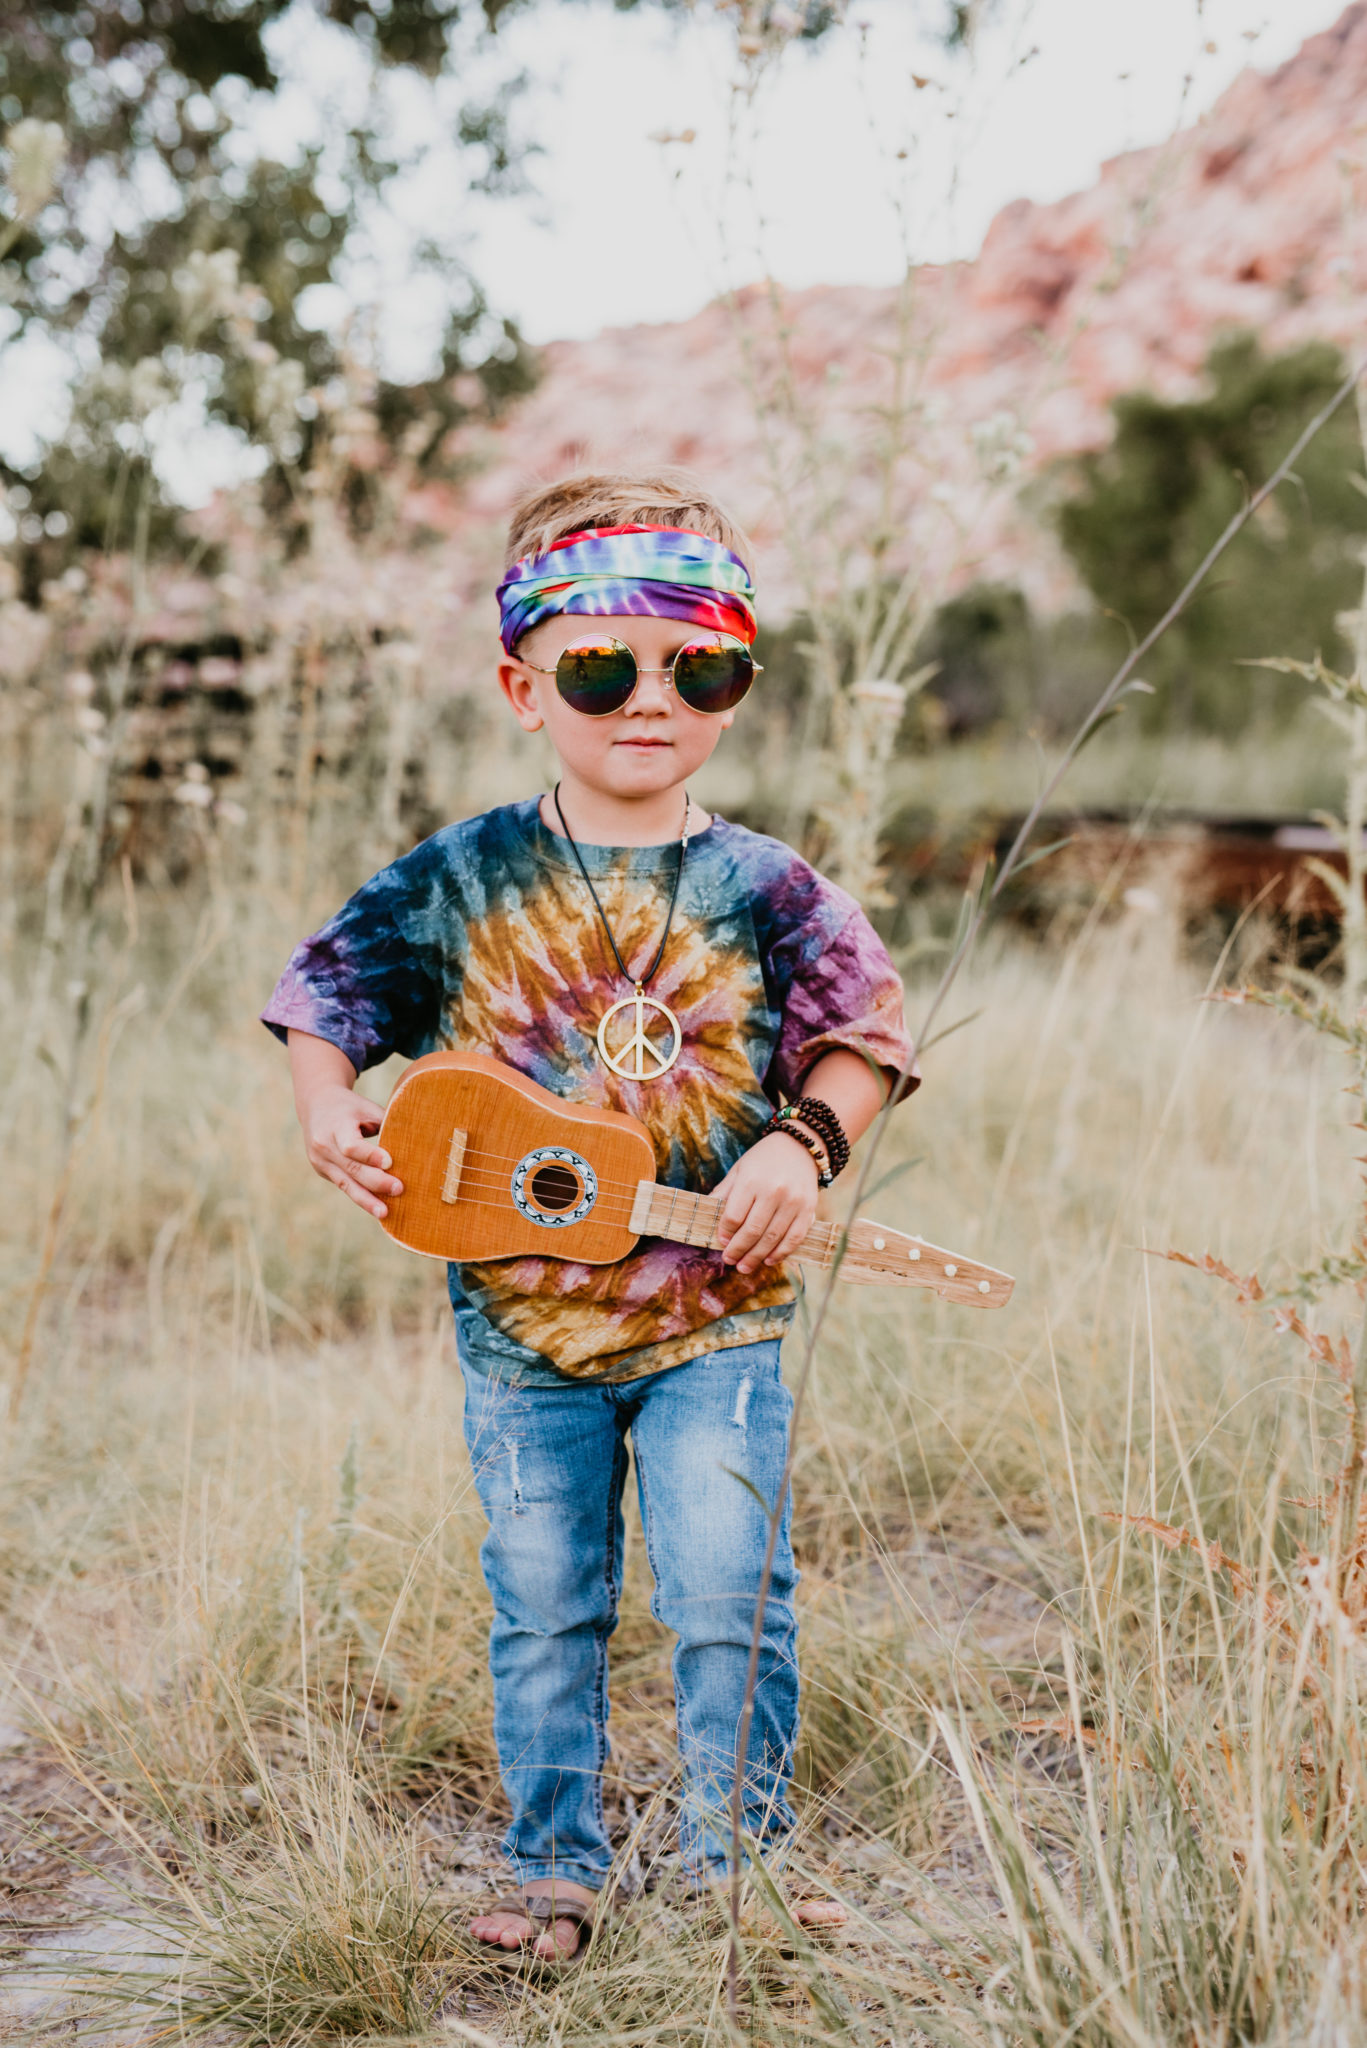 DIY Hippie Costume Ideas for Halloween featured by top US life and style blog, Outfits & Outings: image of a family dresses up as hippies